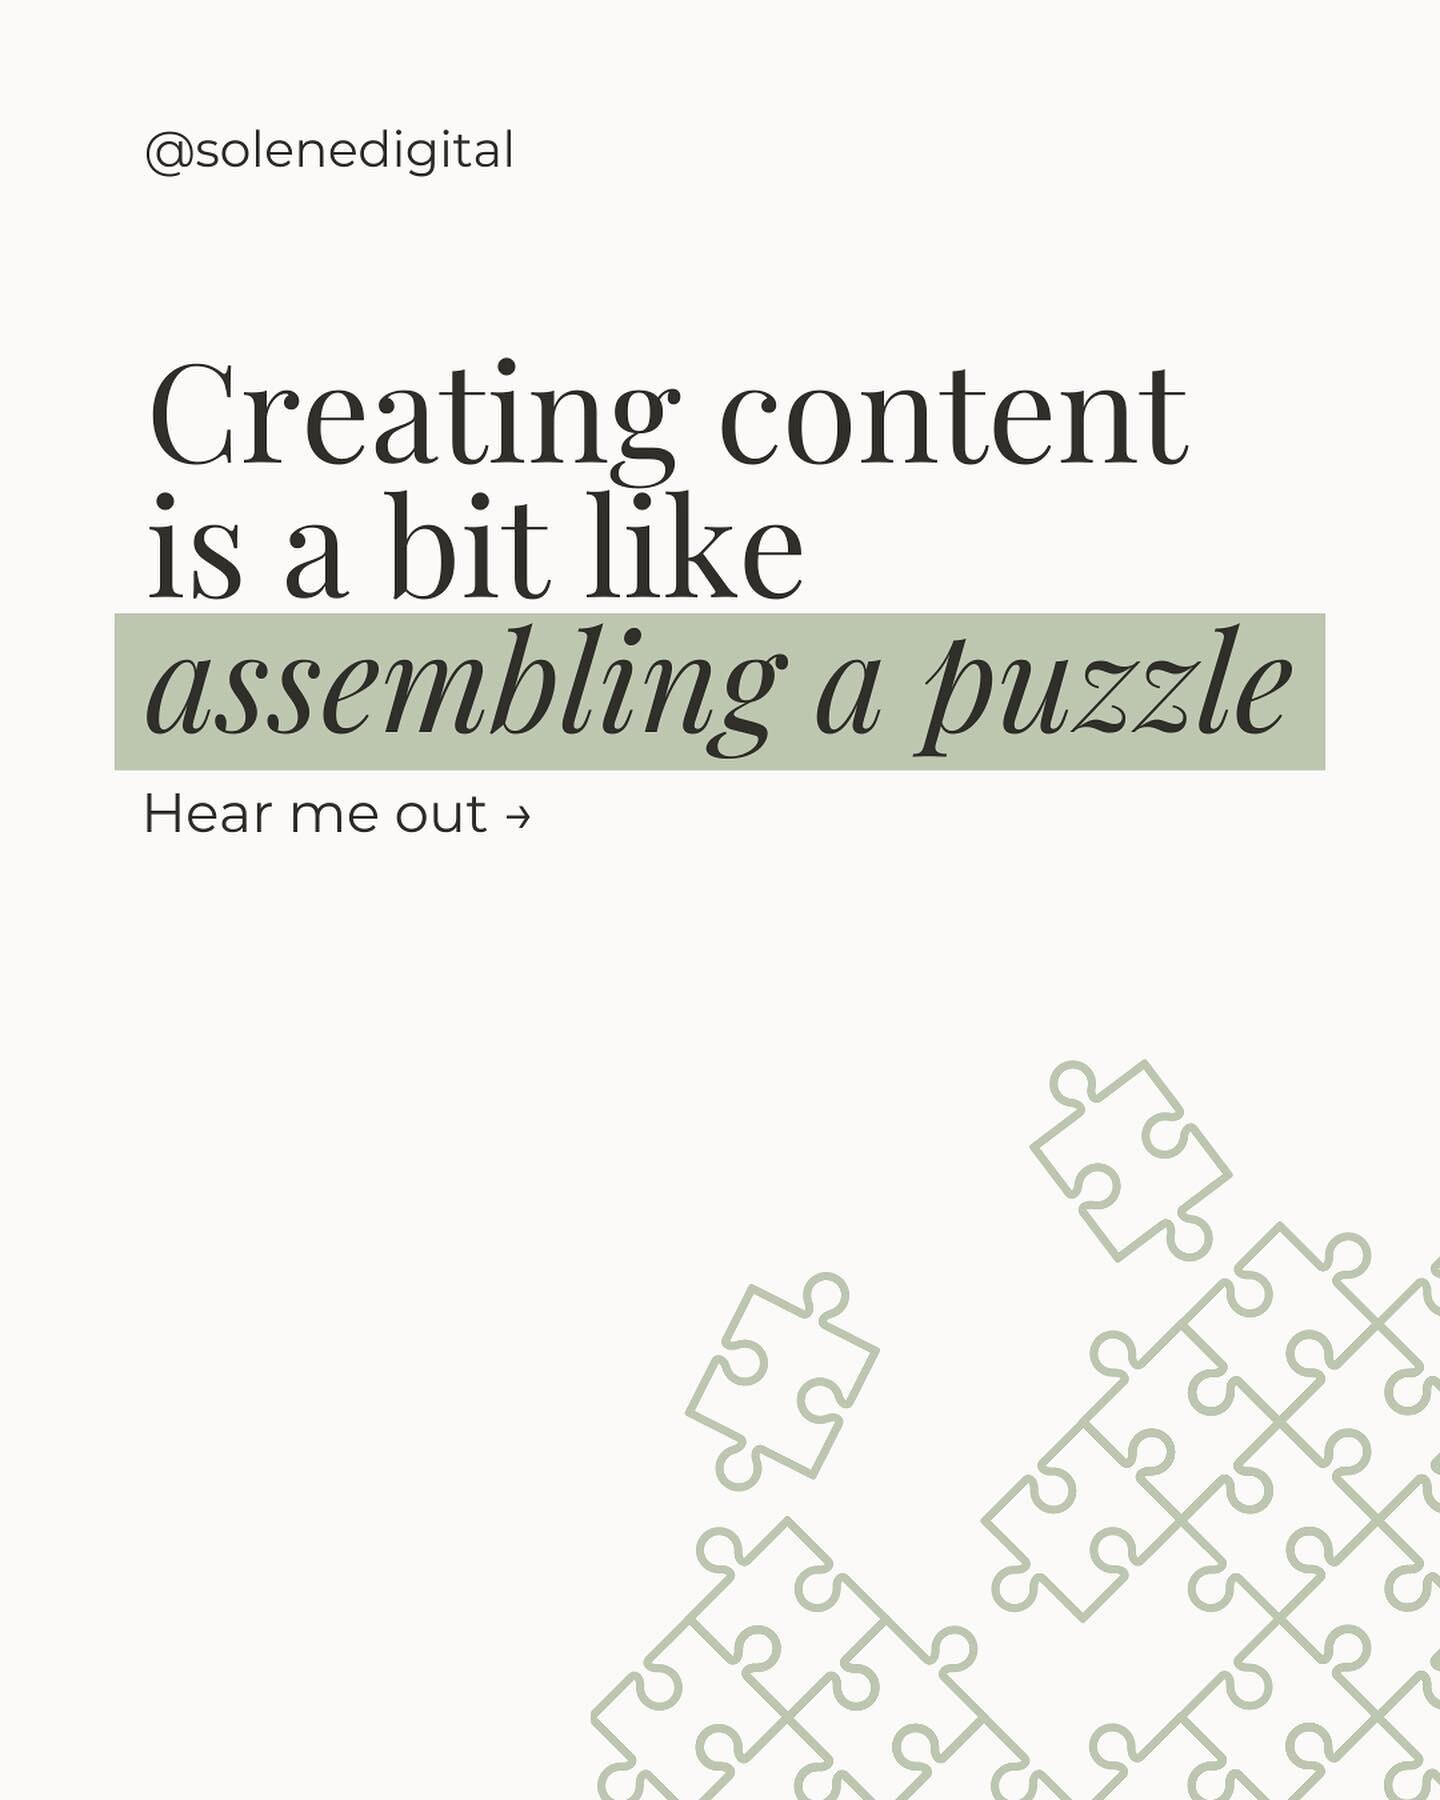 Content creation is like building a puzzle 🧩

Each piece represents a crucial element: your goals, your purpose, the formats you choose, the power of your copywriting, your strategic approach, and the systems you put in place.

These puzzle pieces h